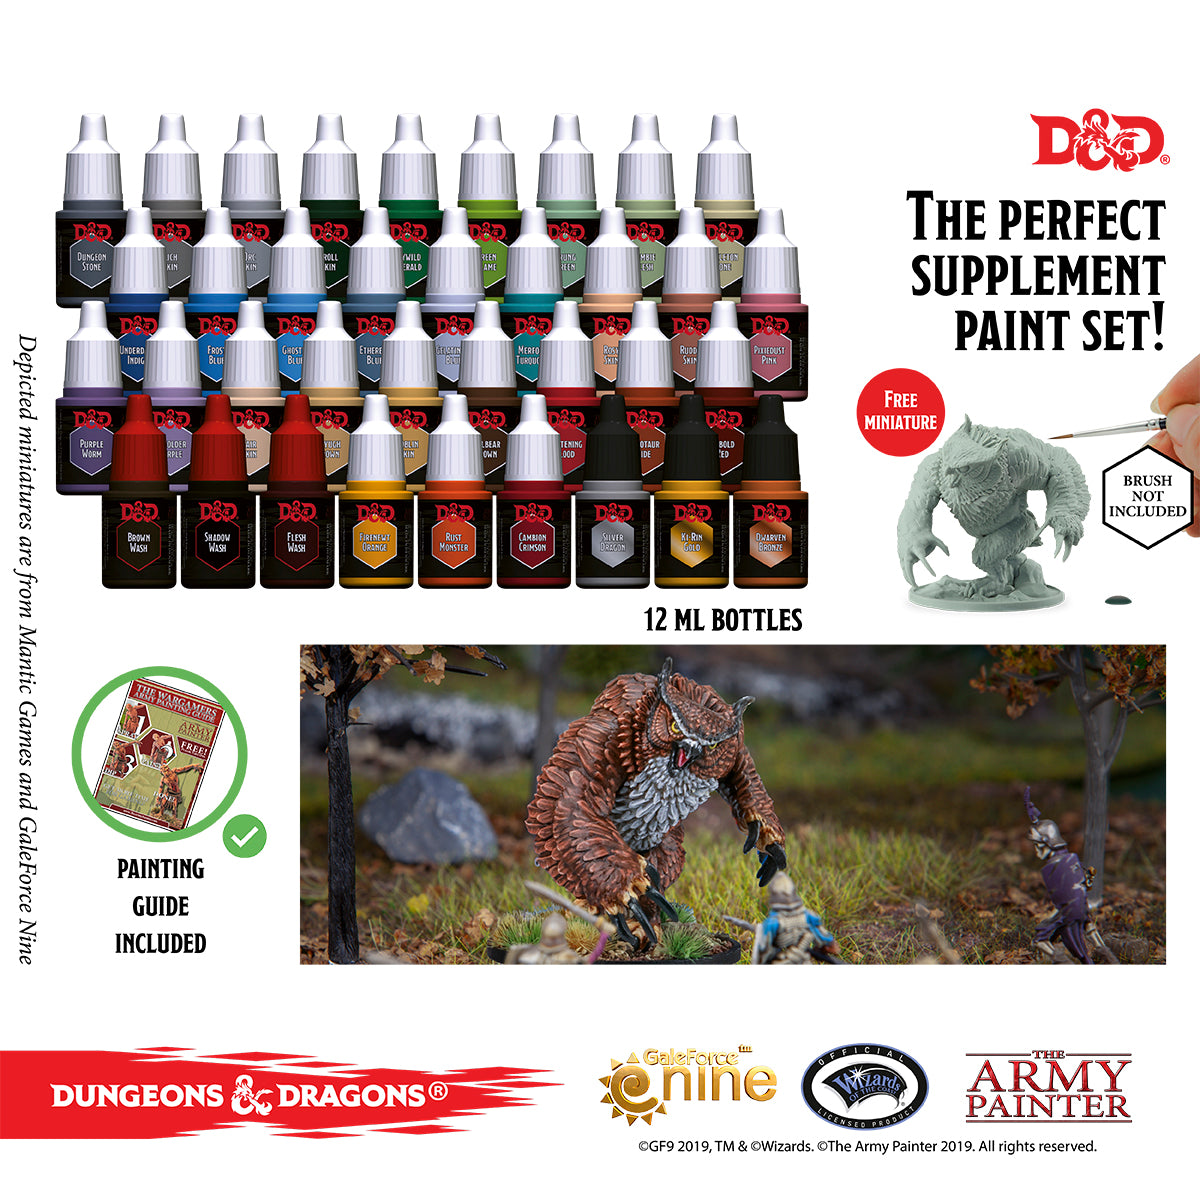 D&D Monsters Paint Set with a FREE Owlbear - The Army Painter